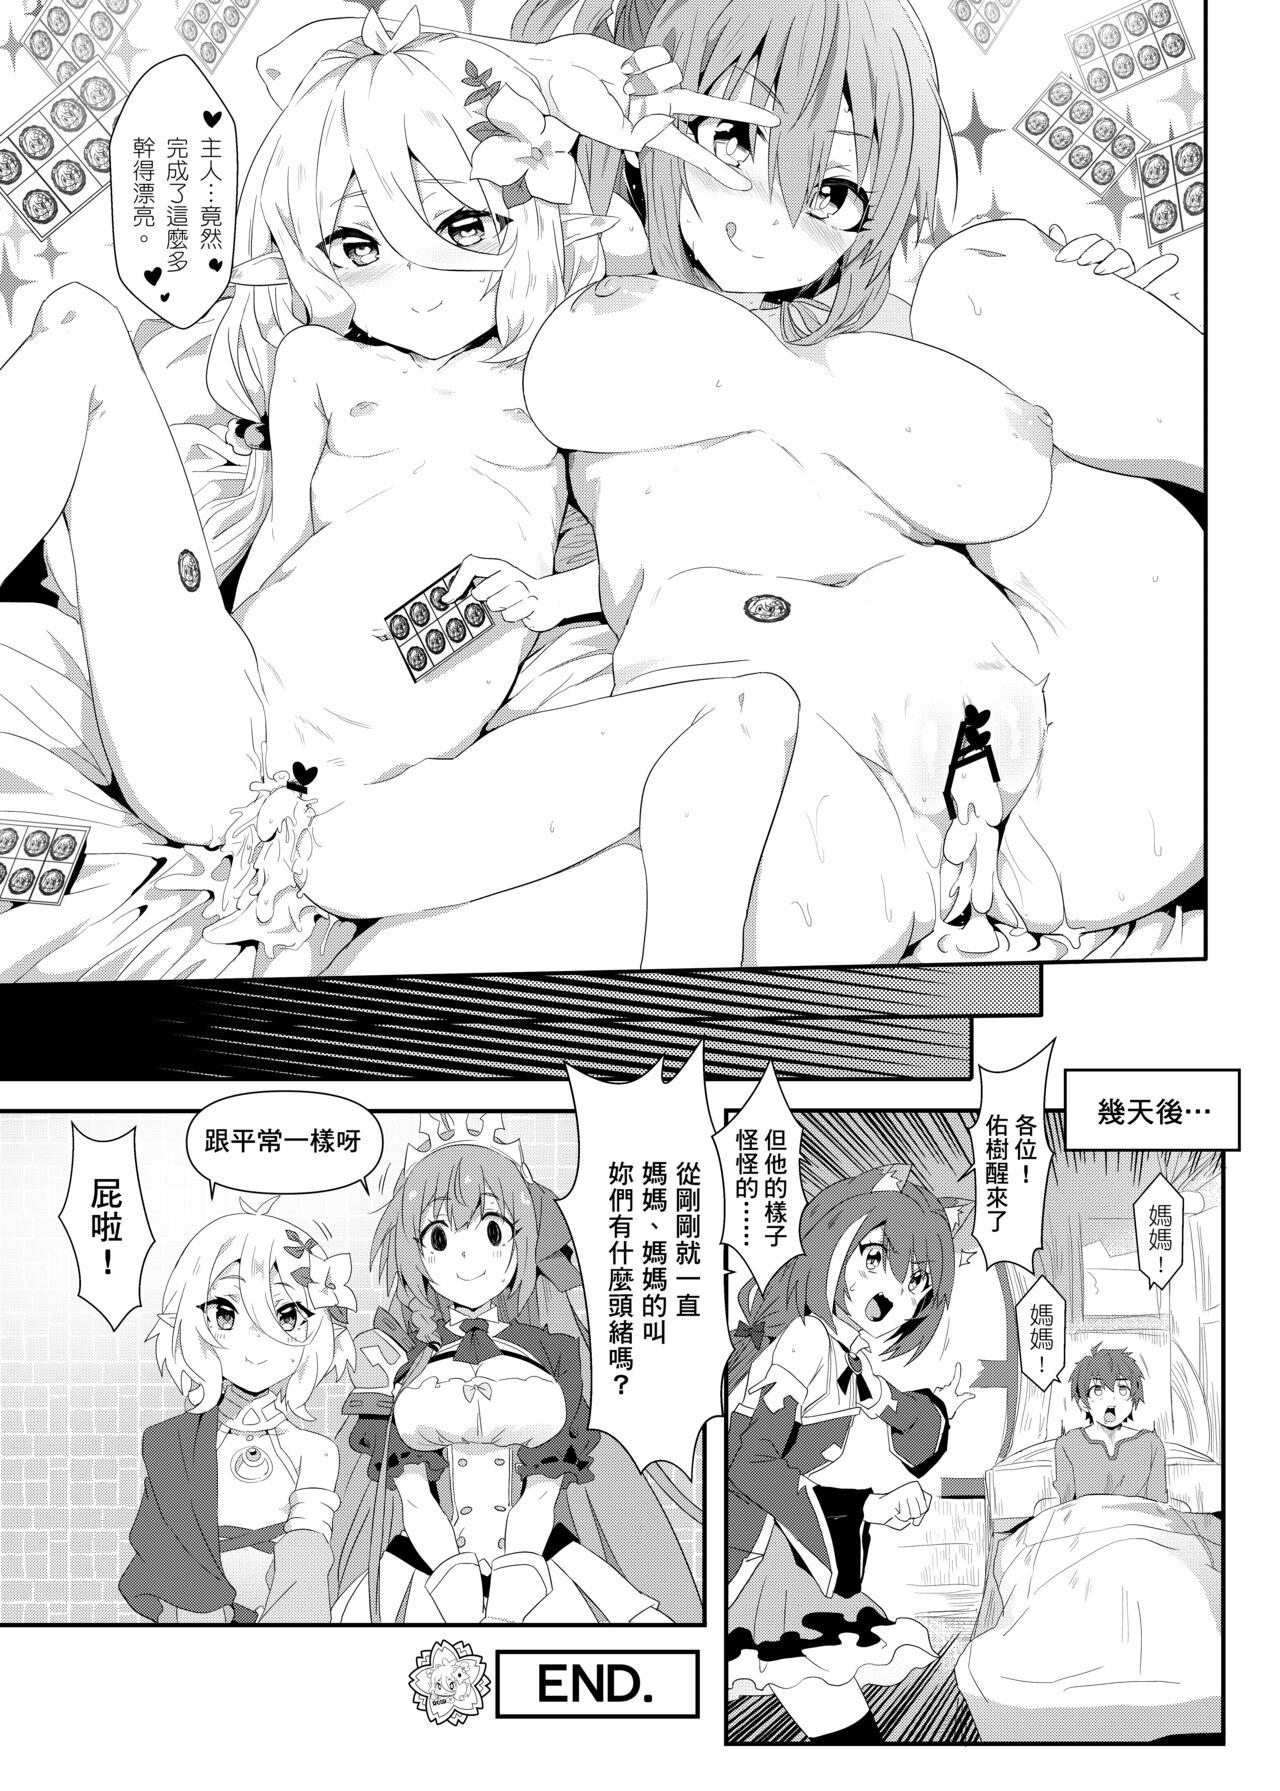 Missionary princess rice - Princess connect Uncensored - Page 20